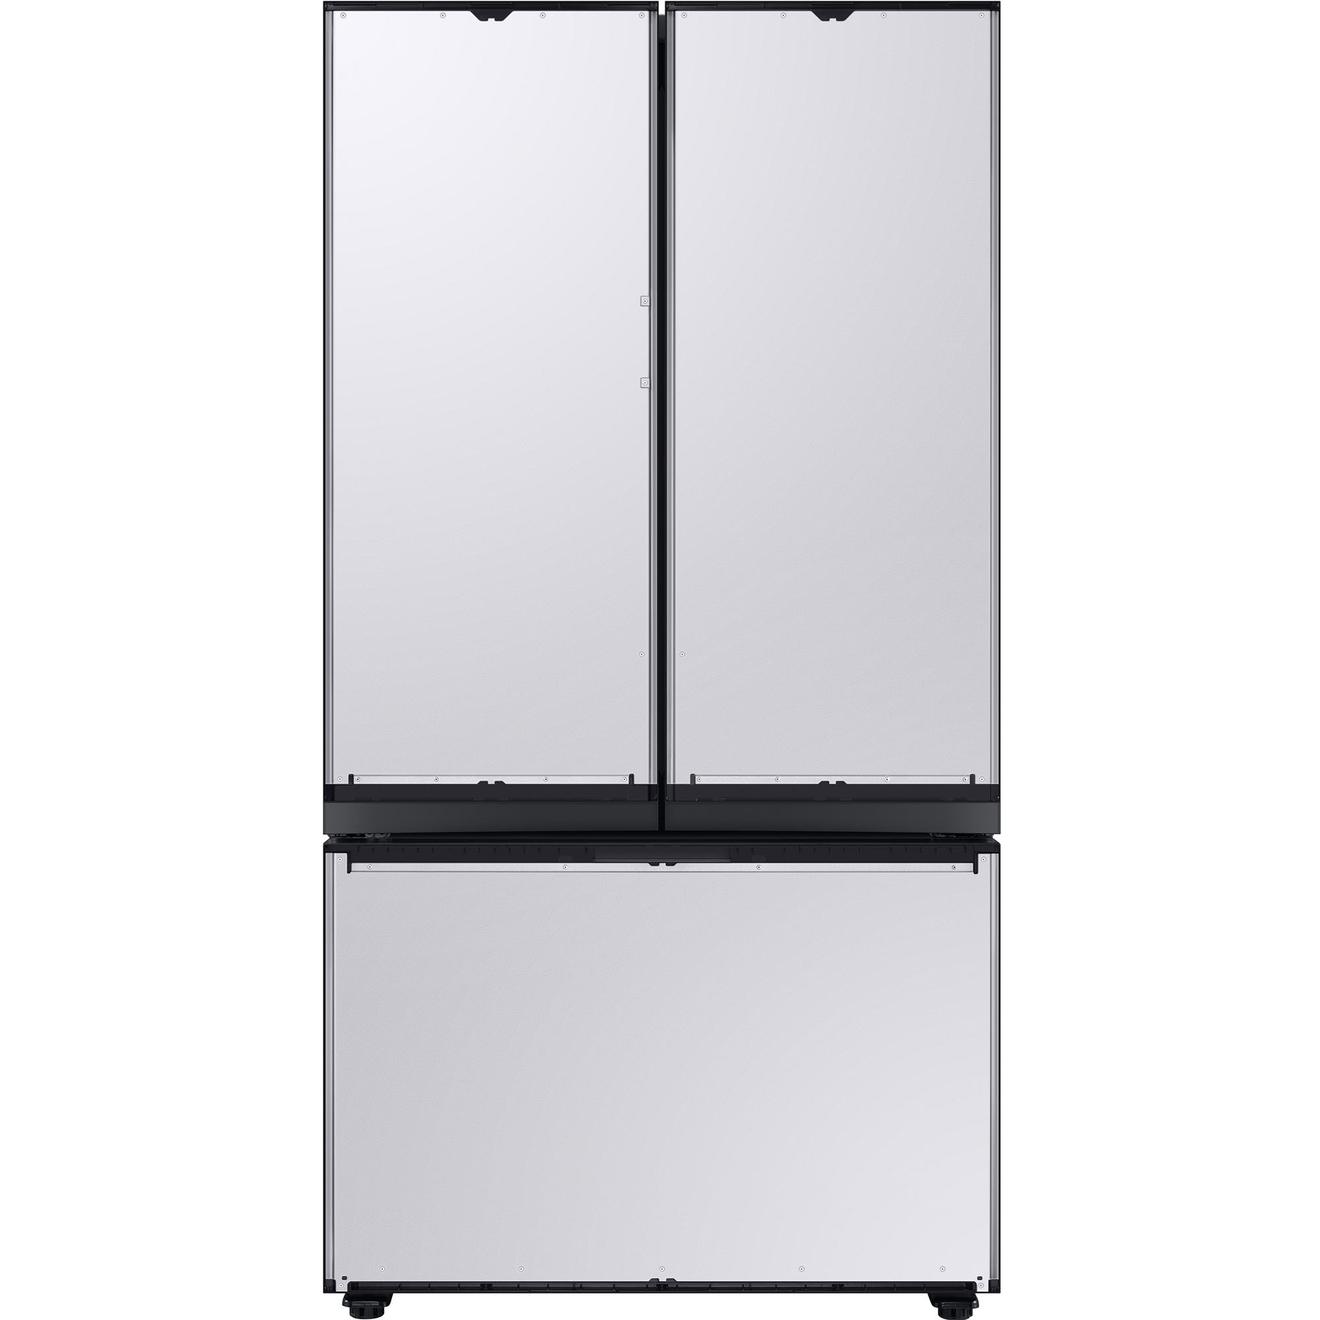 Samsung 24.0 cu.ft. Counter-Depth French-Door Refrigerator offers at $2099.98 in Trail Appliances